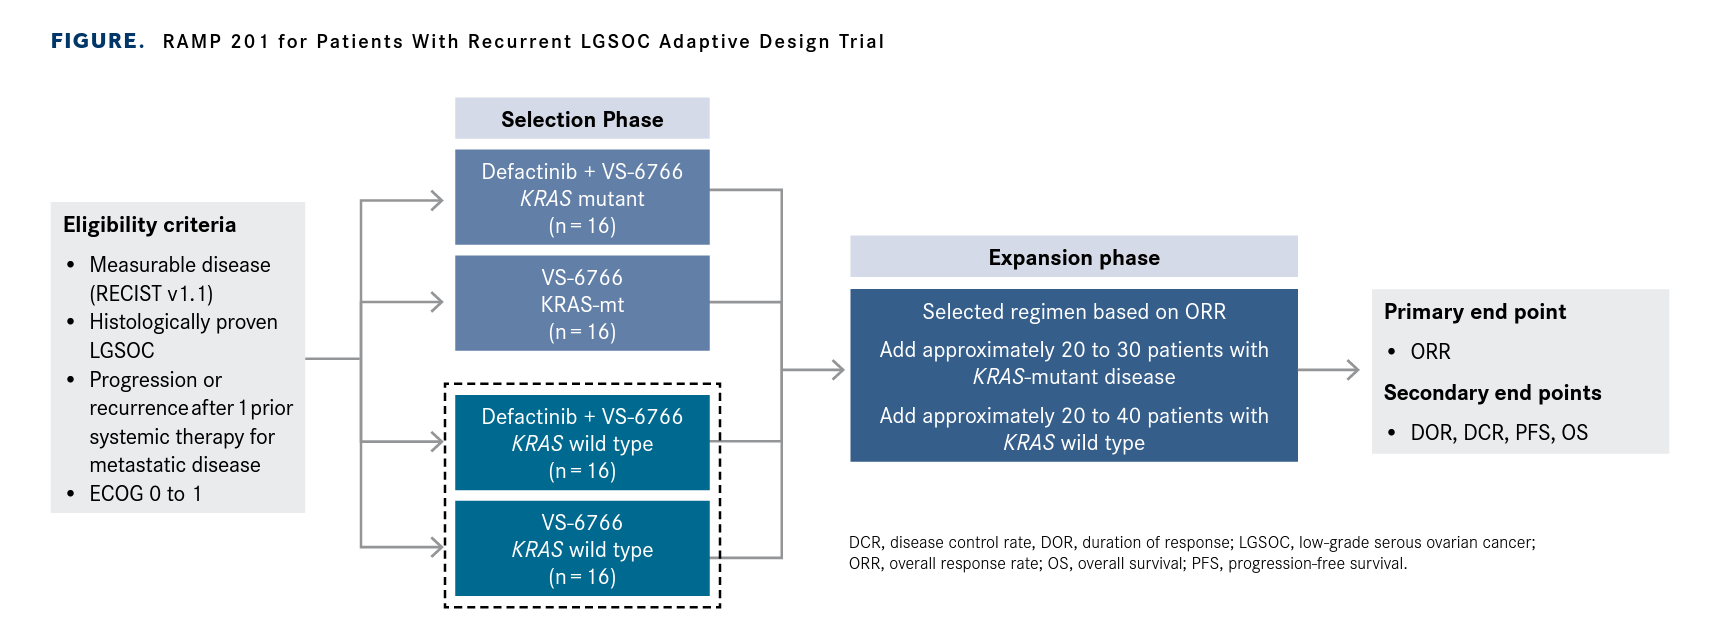 RAMP 201 for Patients With Recurrent LGSOC Adaptive Design